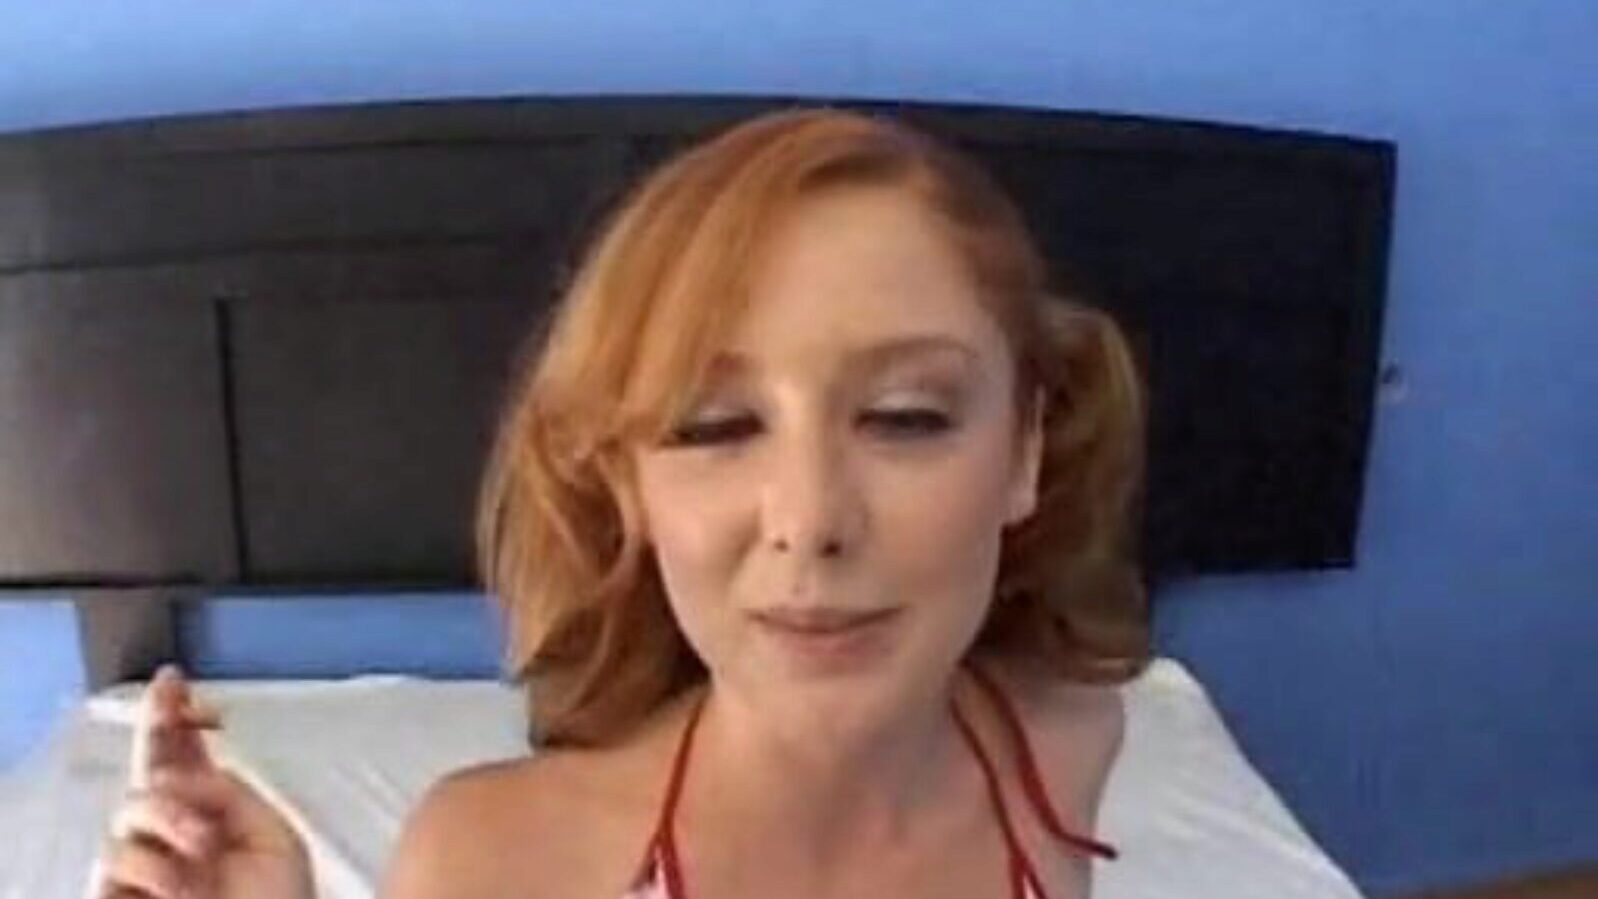 buttfuck sandy-haired yeah i love me some redheads gettin assfucked this bitch is a skank too